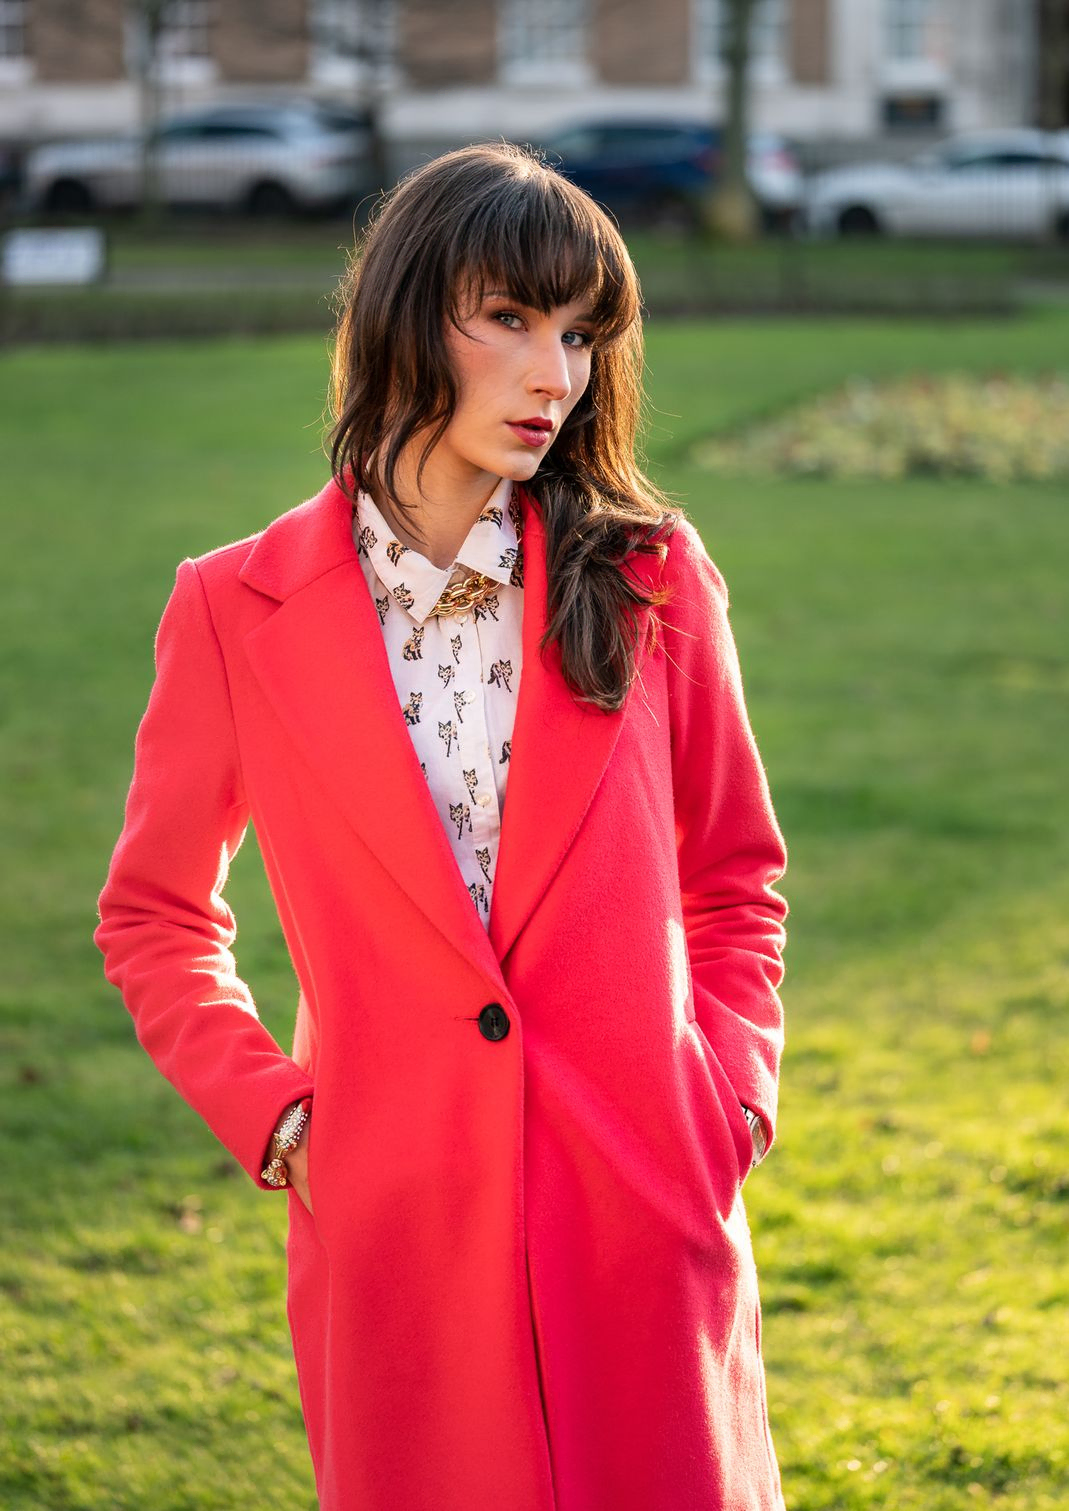 Woman in pink jacket standing in a park